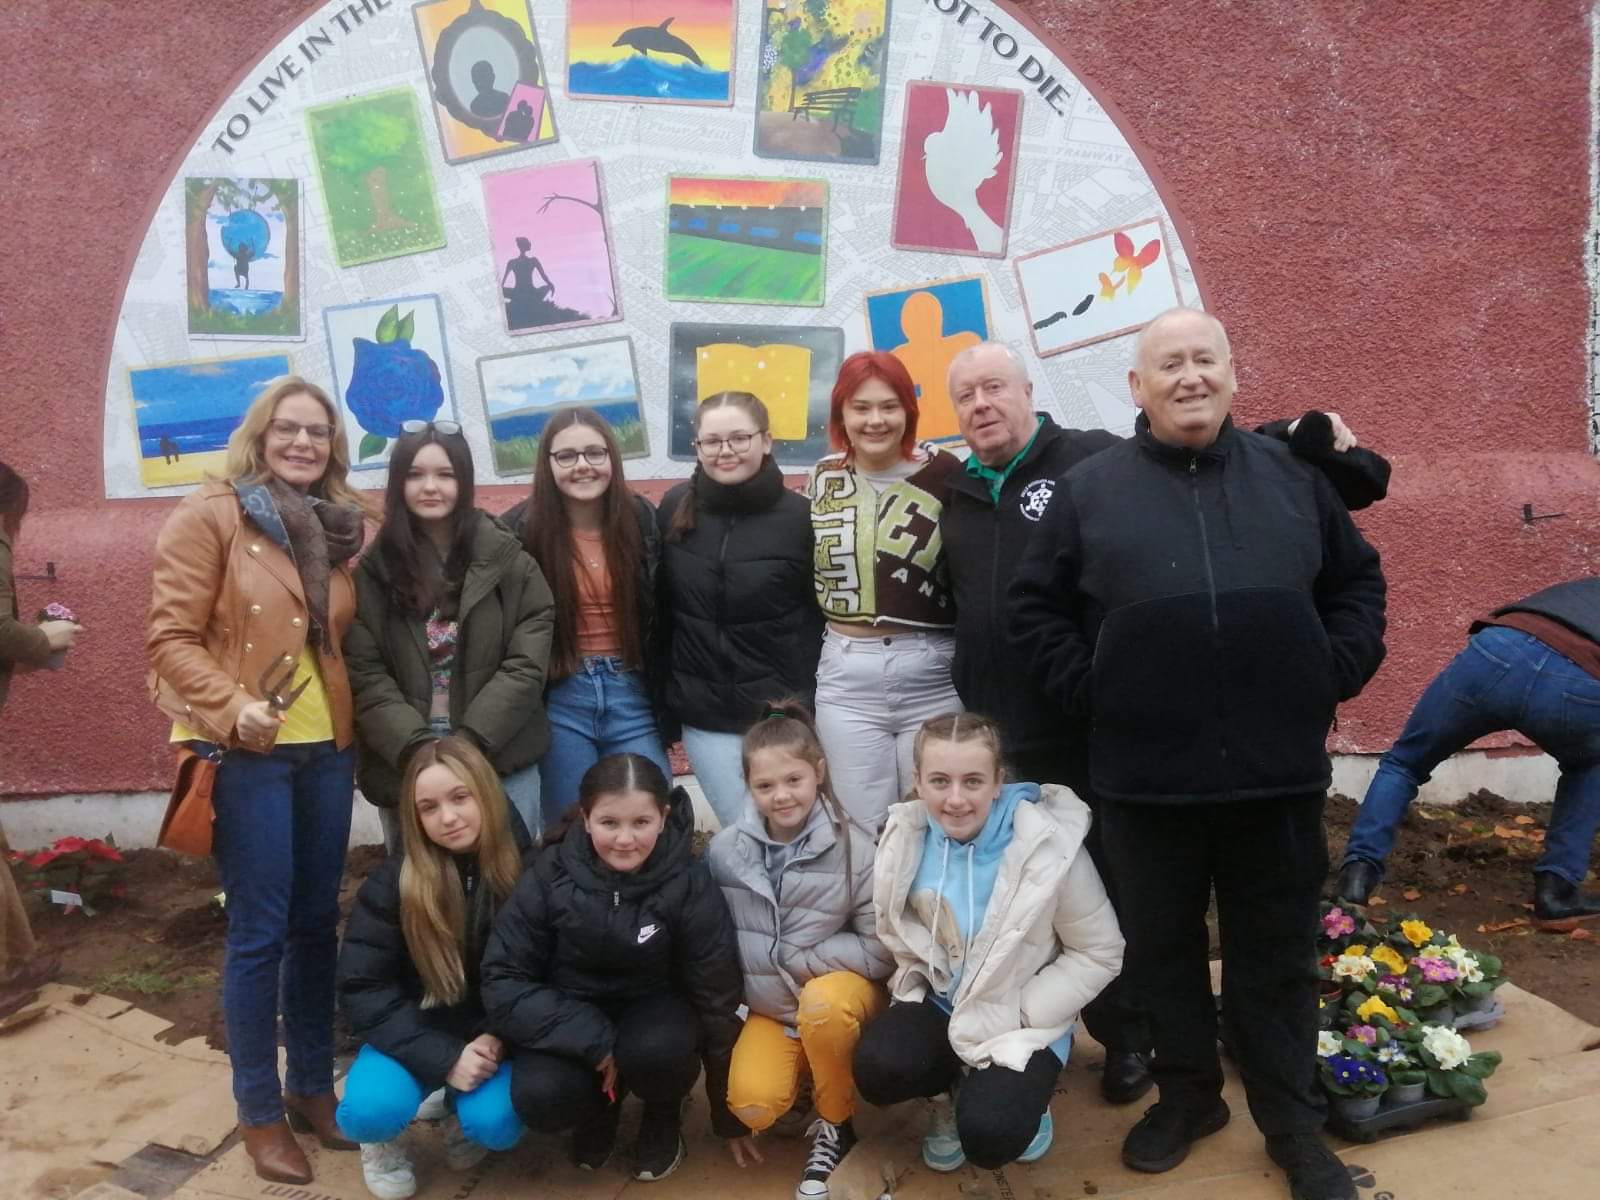 MEMORIAL: Belfast\'s Lord Mayor, Cllr Tina Black joined families and young people on Saturday to unveil the murals and garden